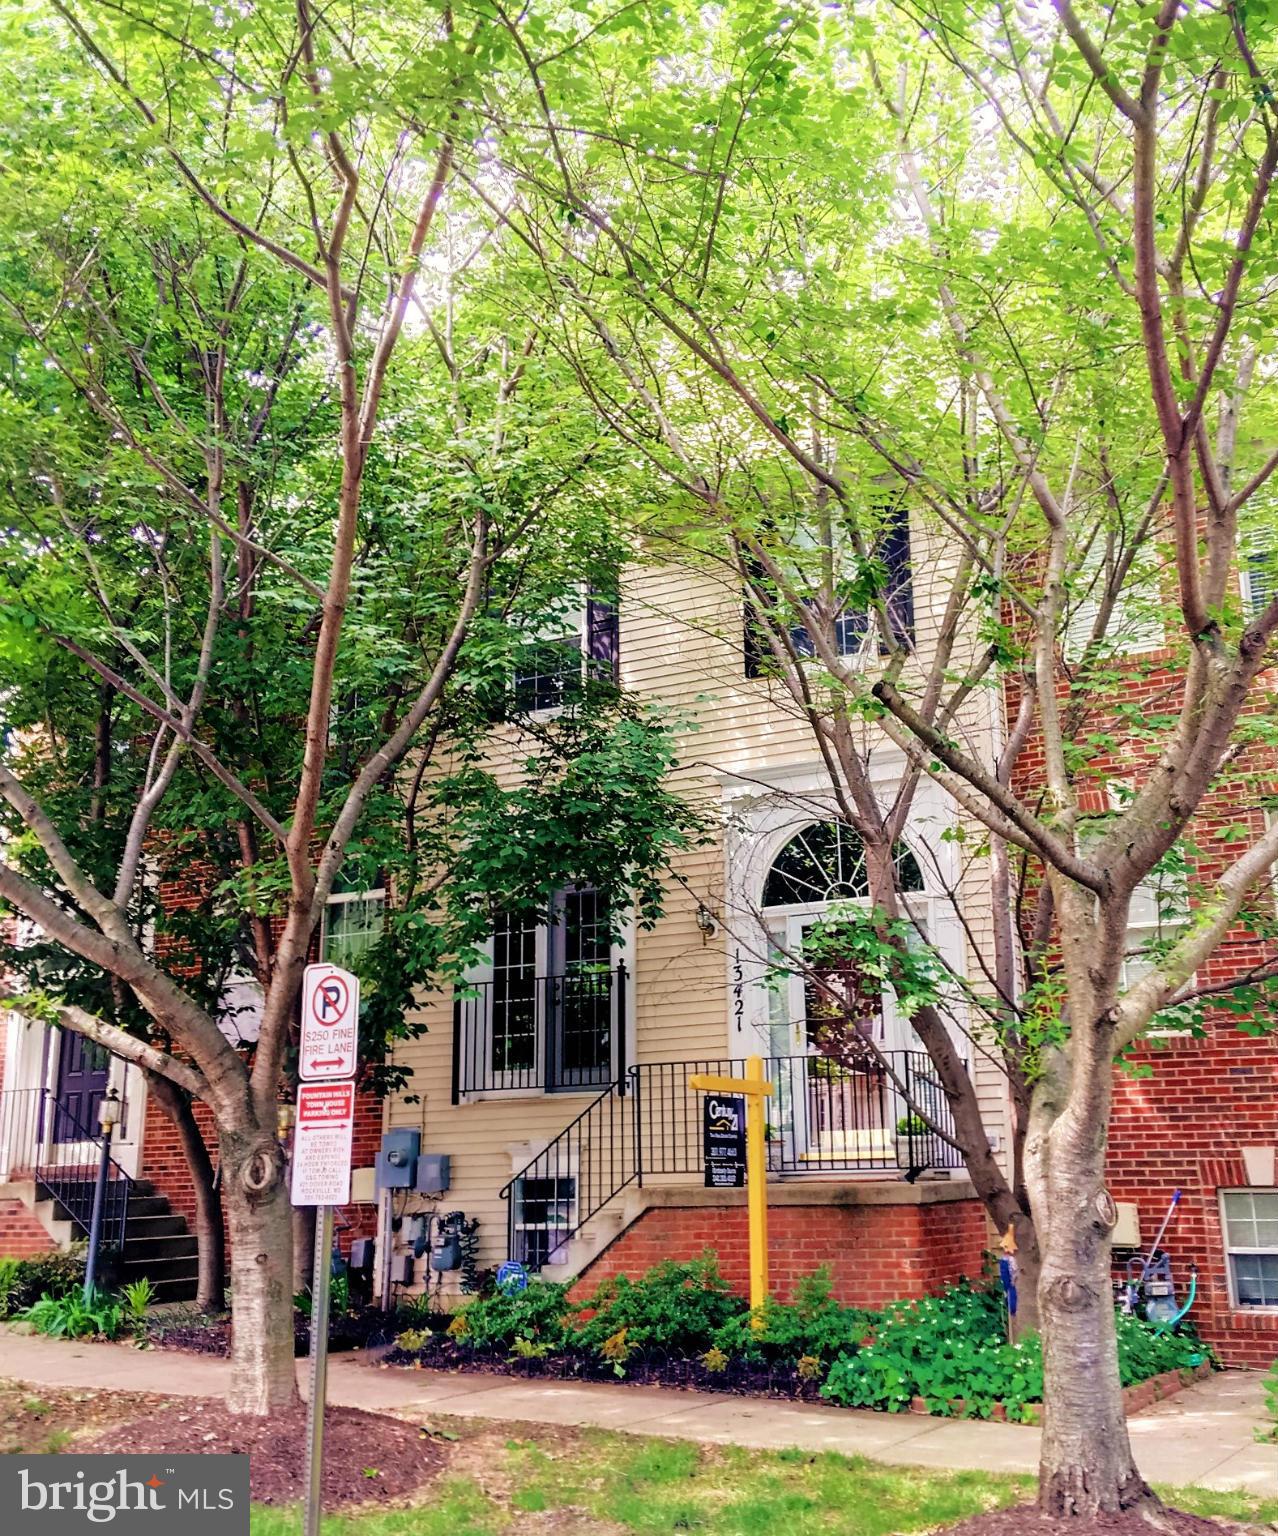 front view of a house with a tree and plants